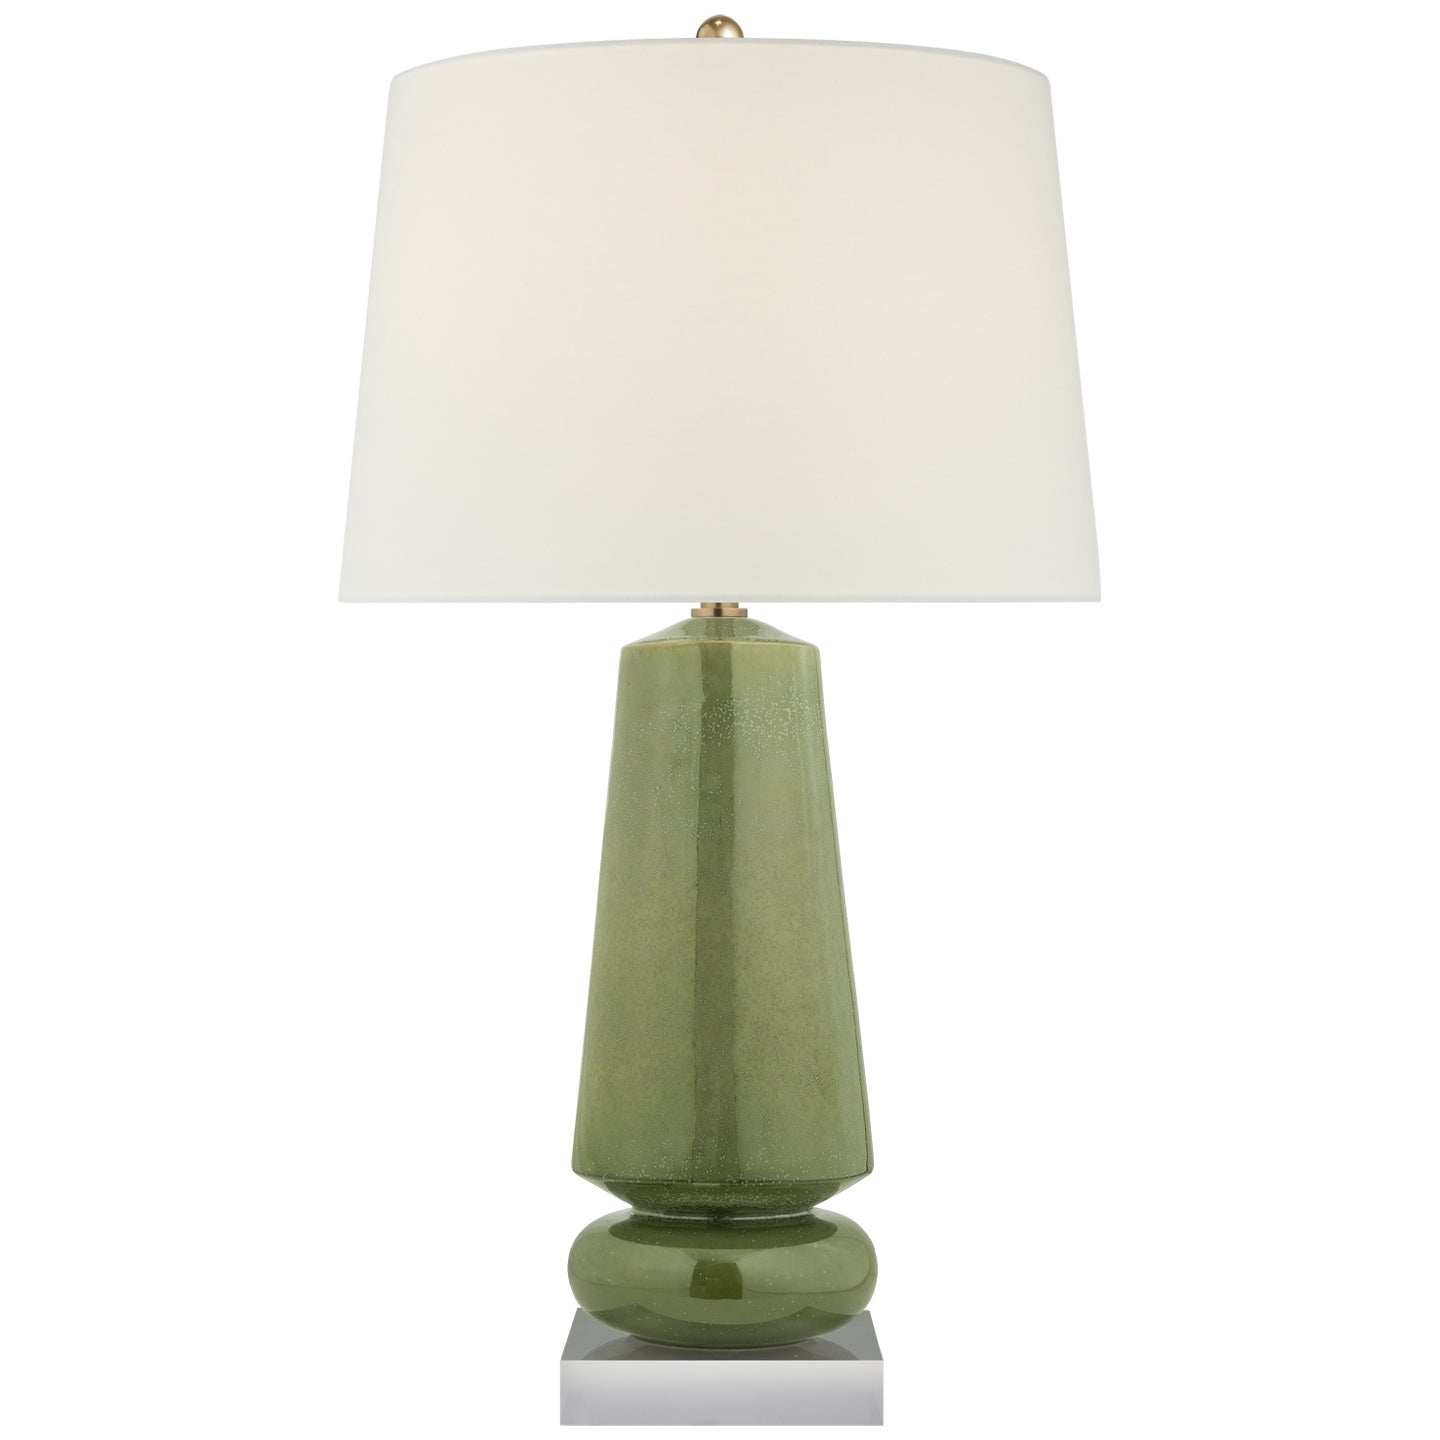 Load image into Gallery viewer, Visual Comfort Signature - CHA 8670SHK-L - One Light Table Lamp - Parisienne - Shellish Kiwi
